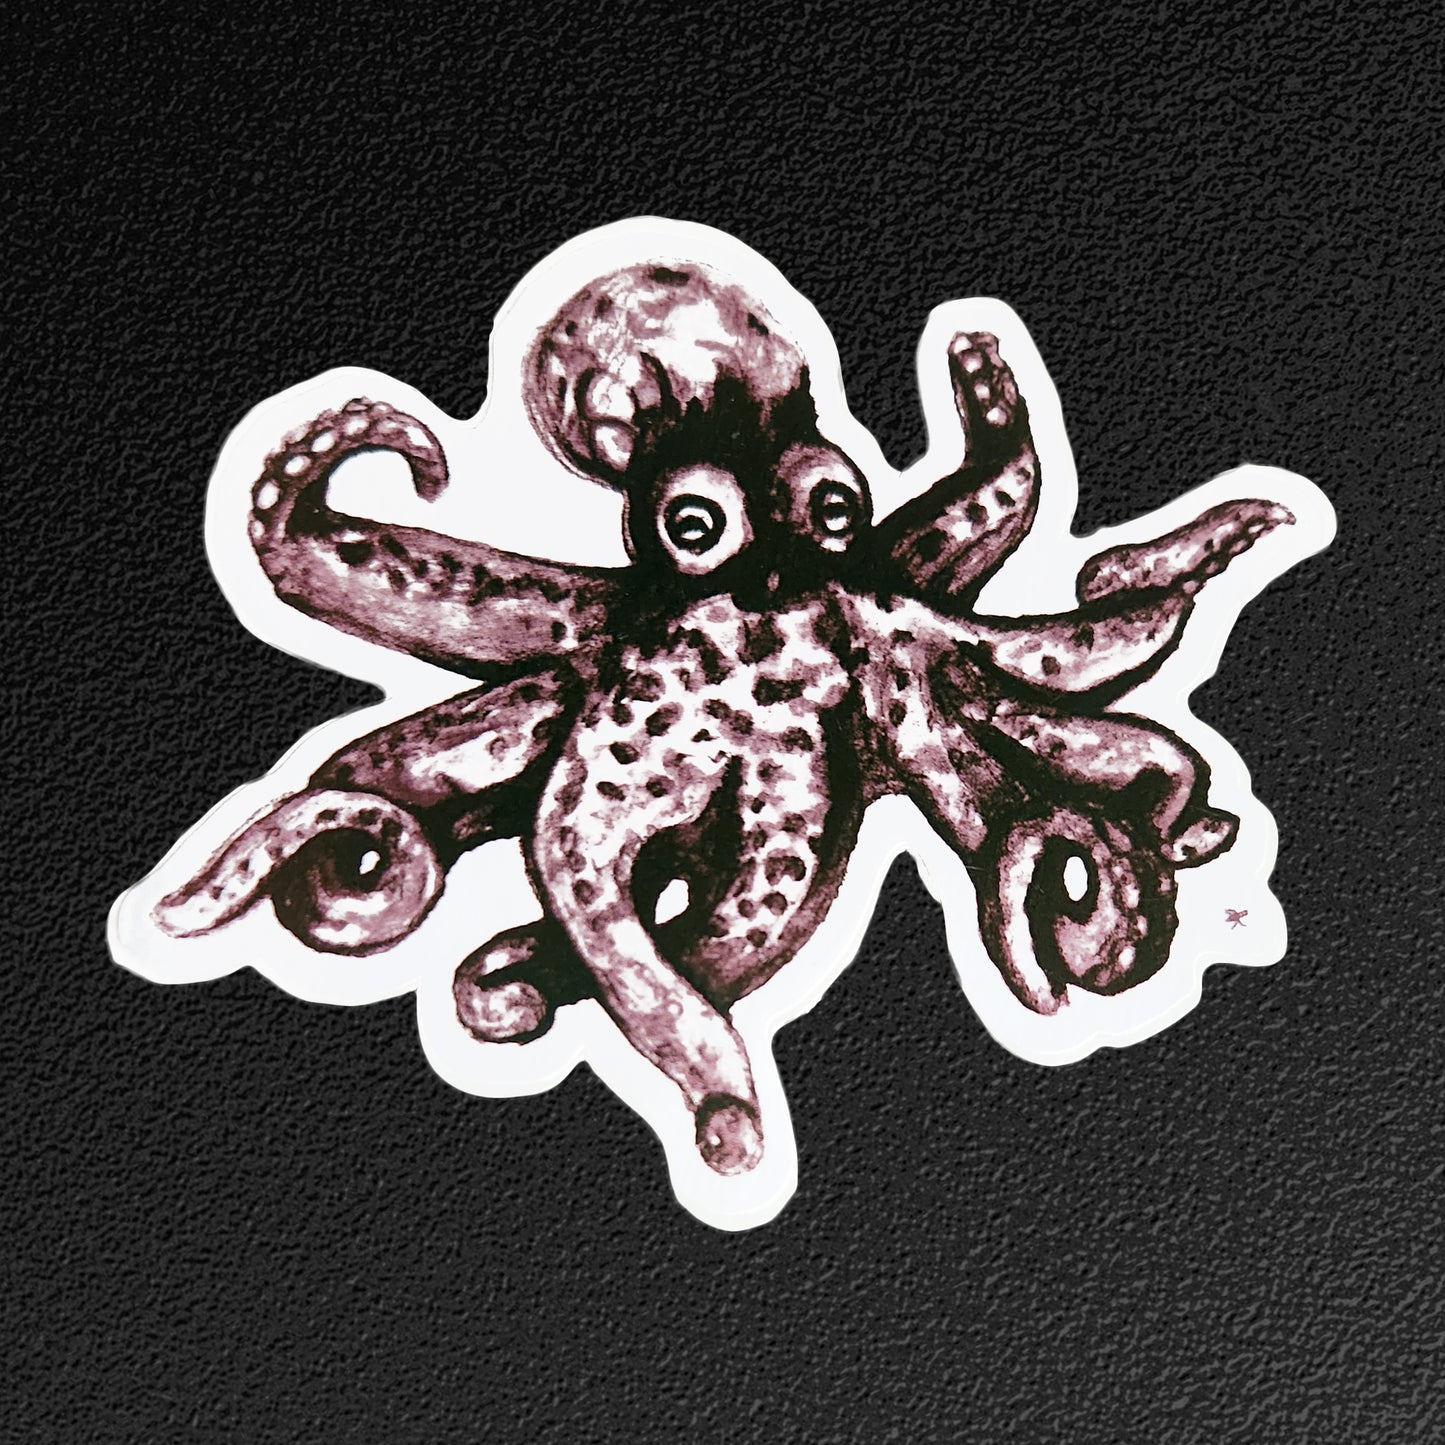 O is for Octopus B&W Vinyl Sticker/Decal